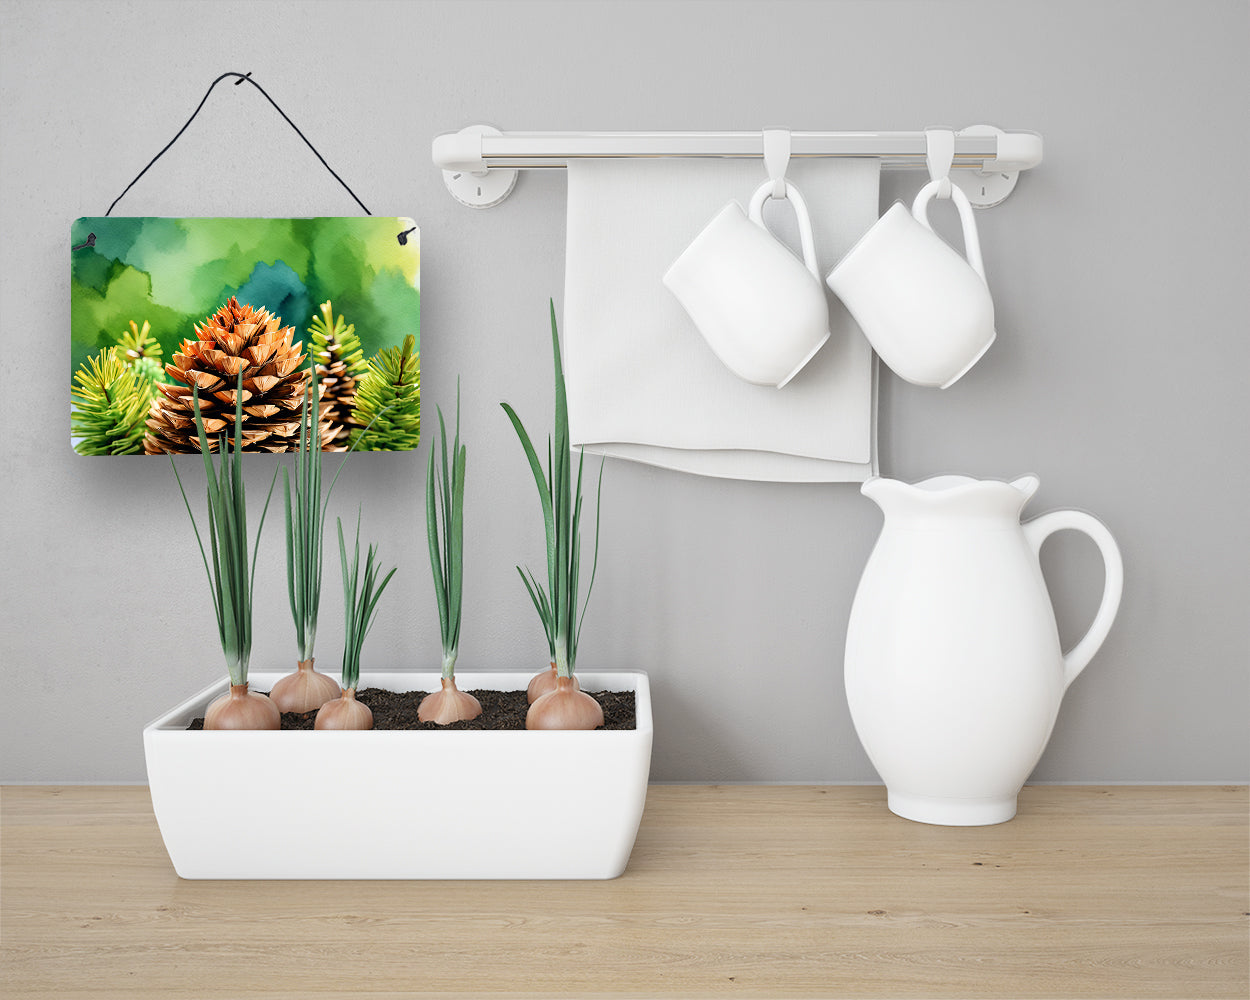 Maine White Pine Cone and Tassels in Watercolor Wall or Door Hanging Prints